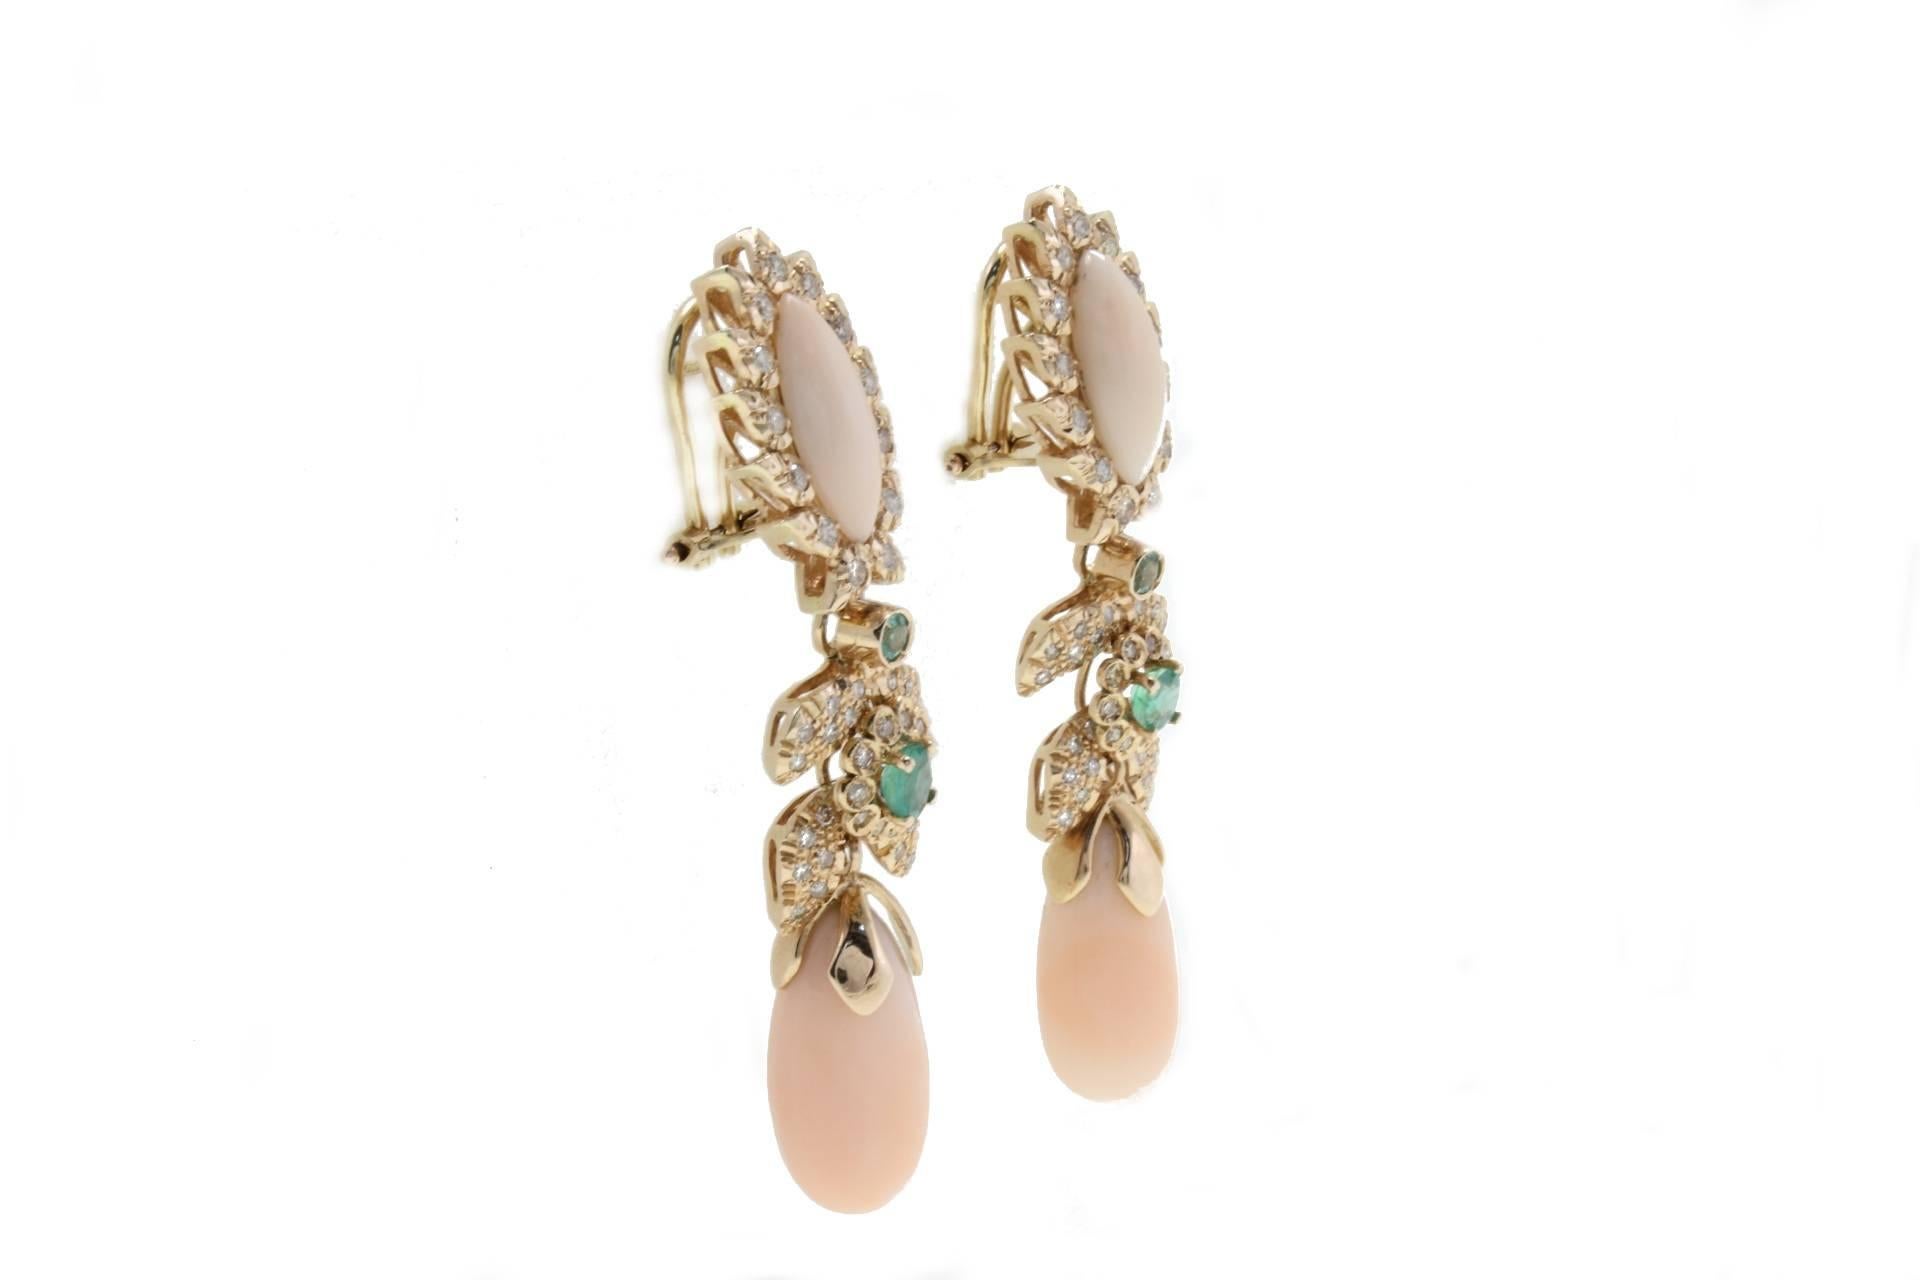 Amazing earrings in 14kt yellow gold mounted with diamonds, emeralds and coral.

Diamonds 1.59 kt
Emeralds 1.05 kt
Coral 5.30 gr
Tot.Weight 19.70 gr
R.F hgca